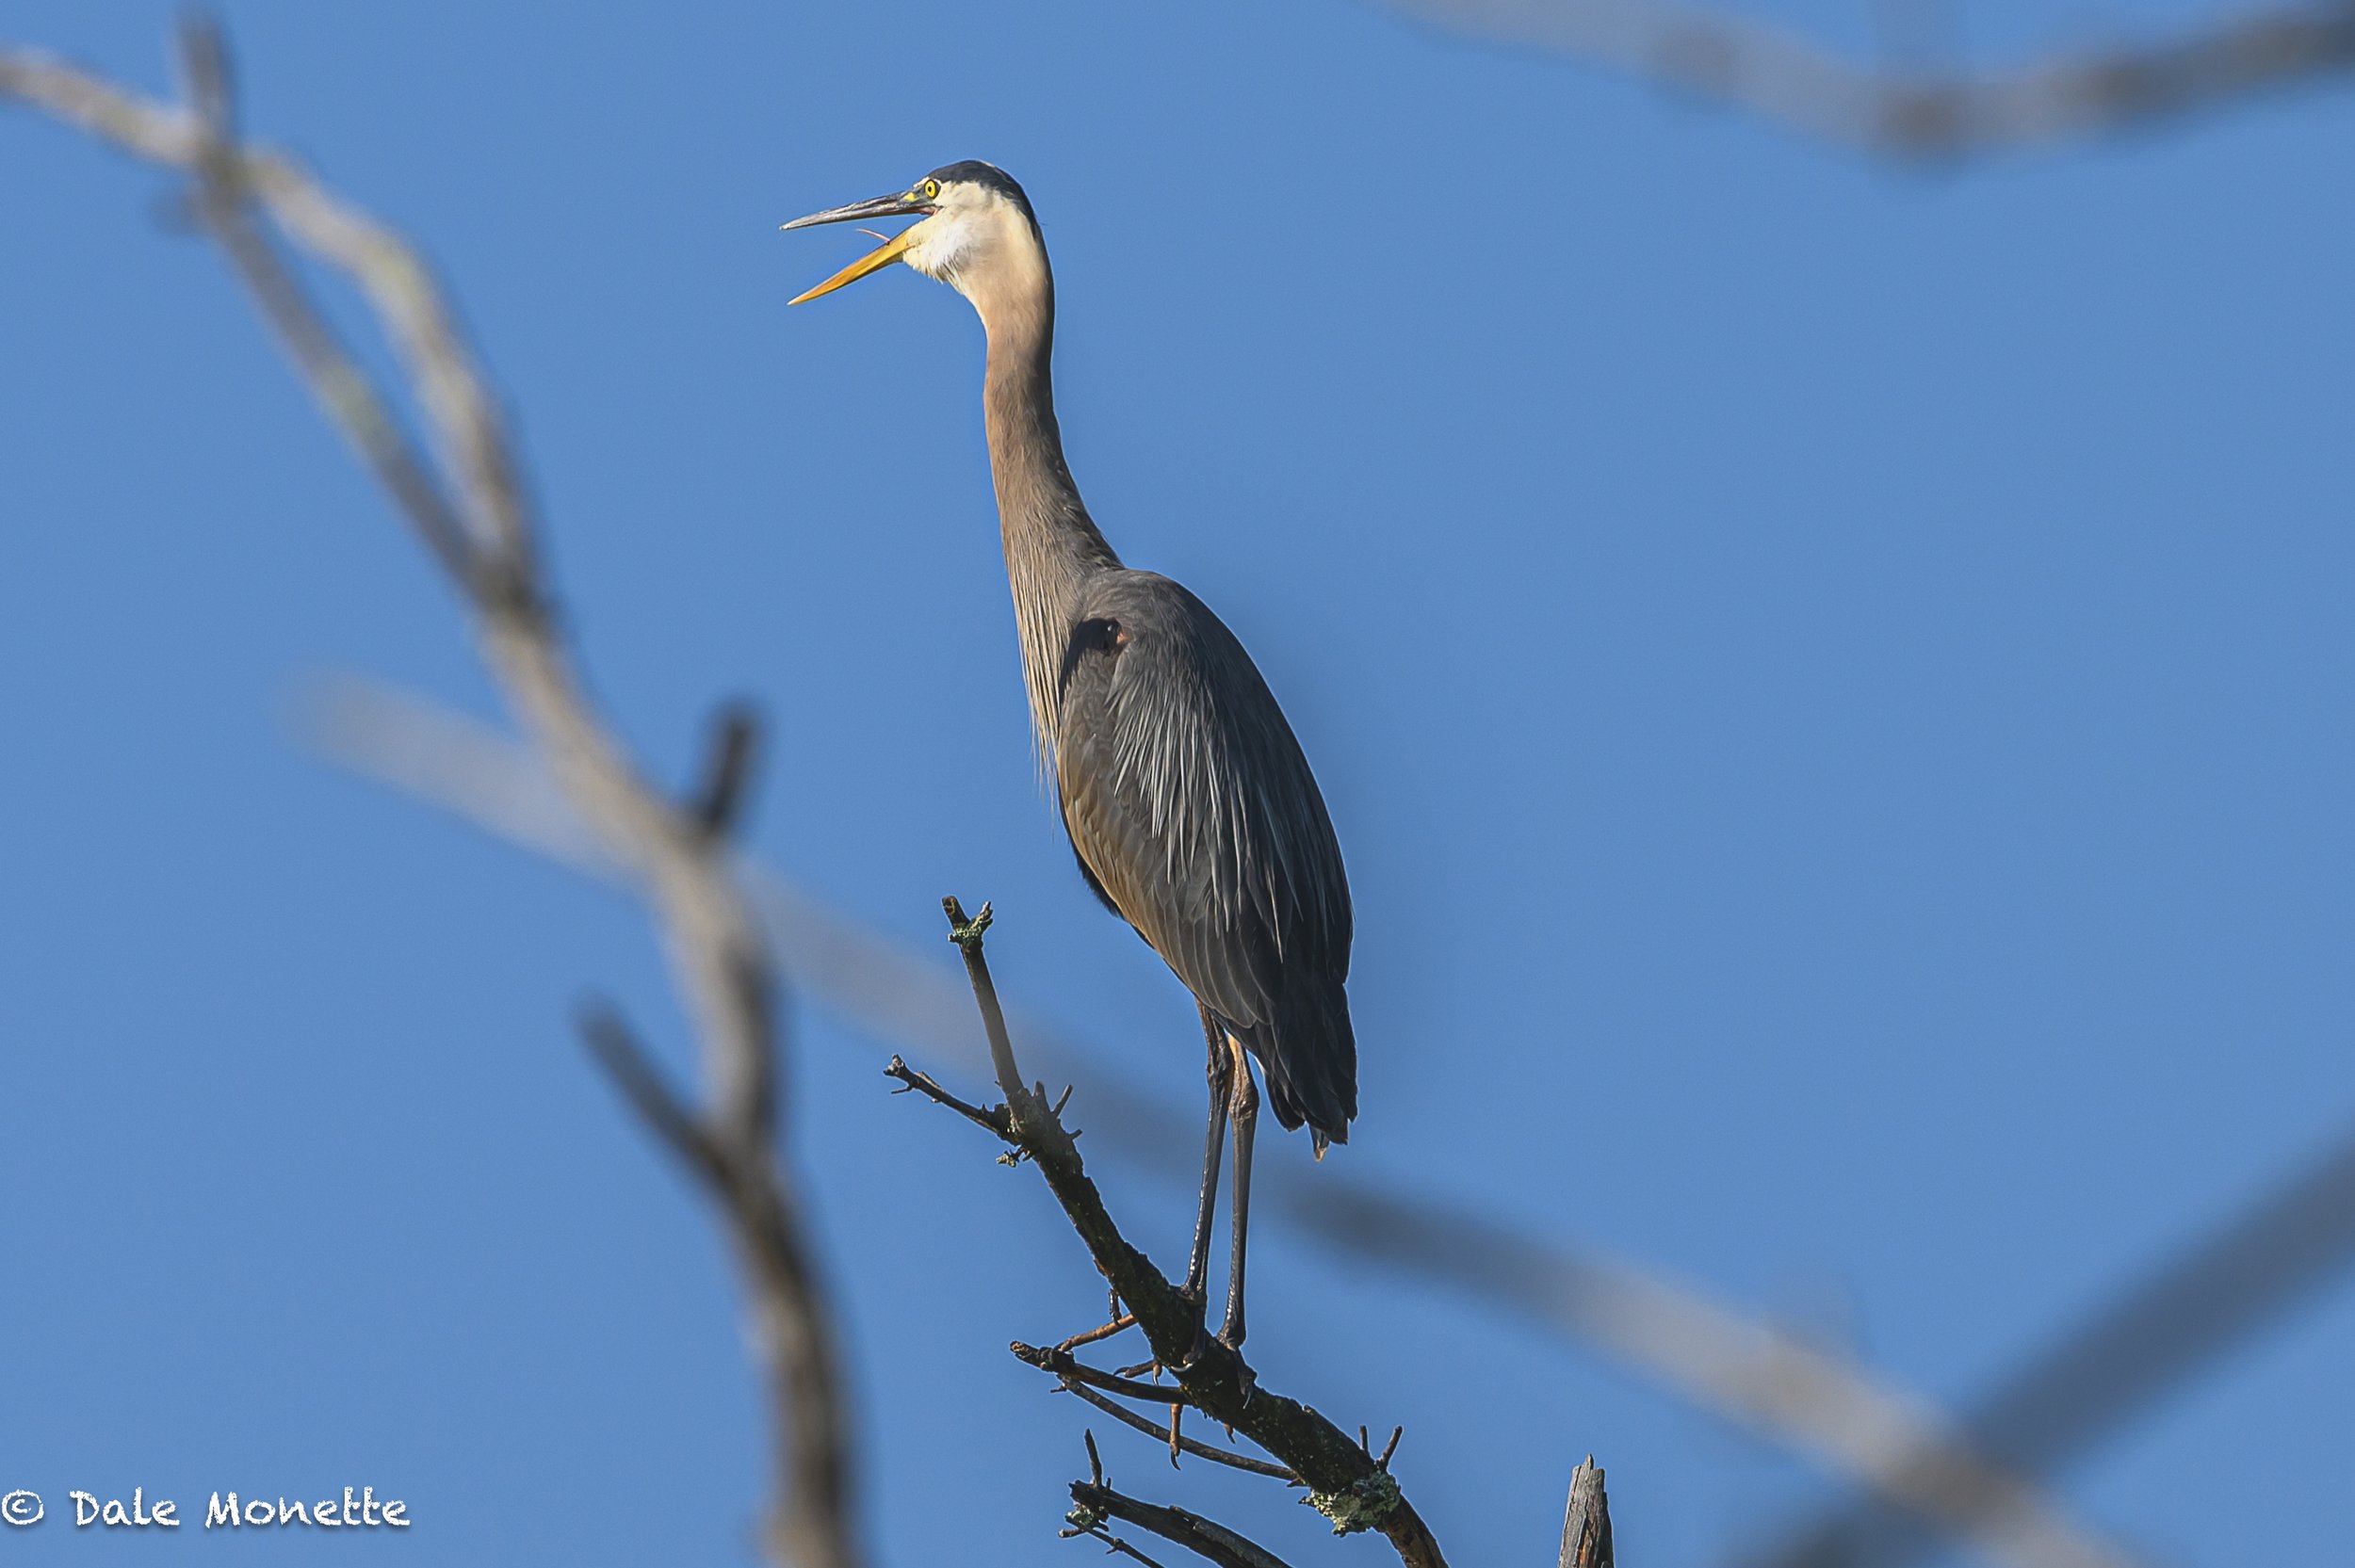   Even the great blue herons are having problems with the heat and humidity today…  